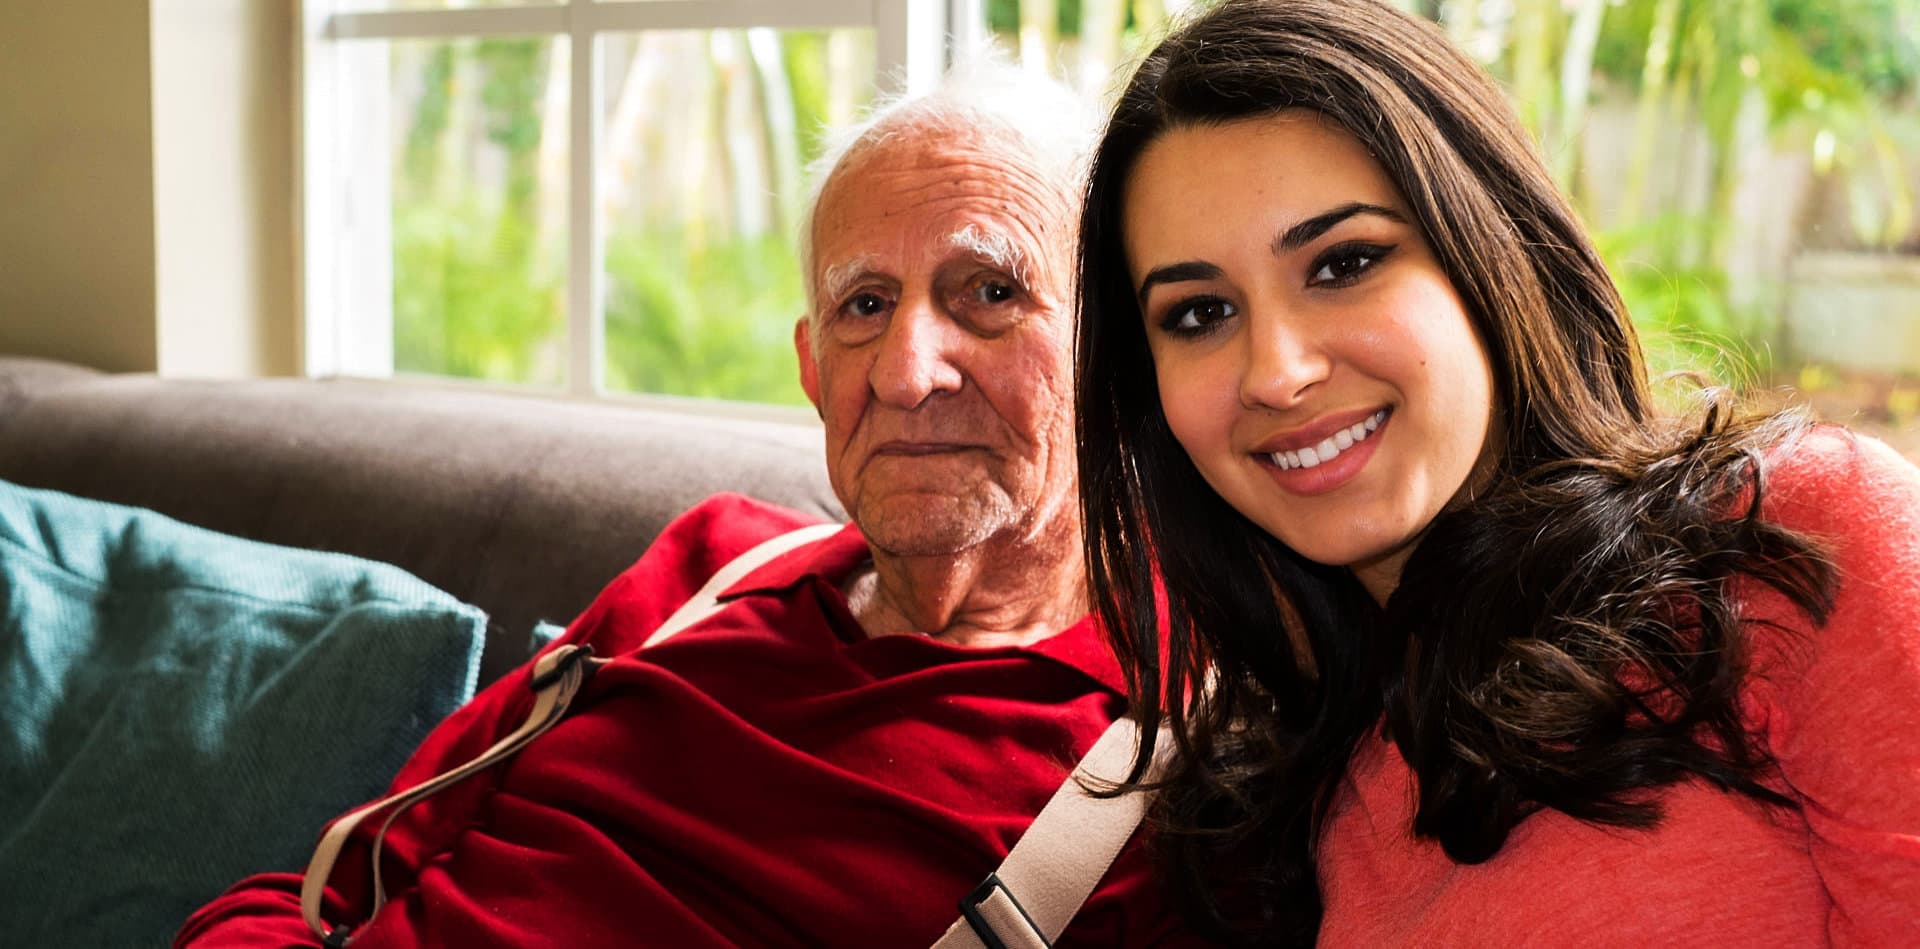 an elderly man with a beautiful woman smiling